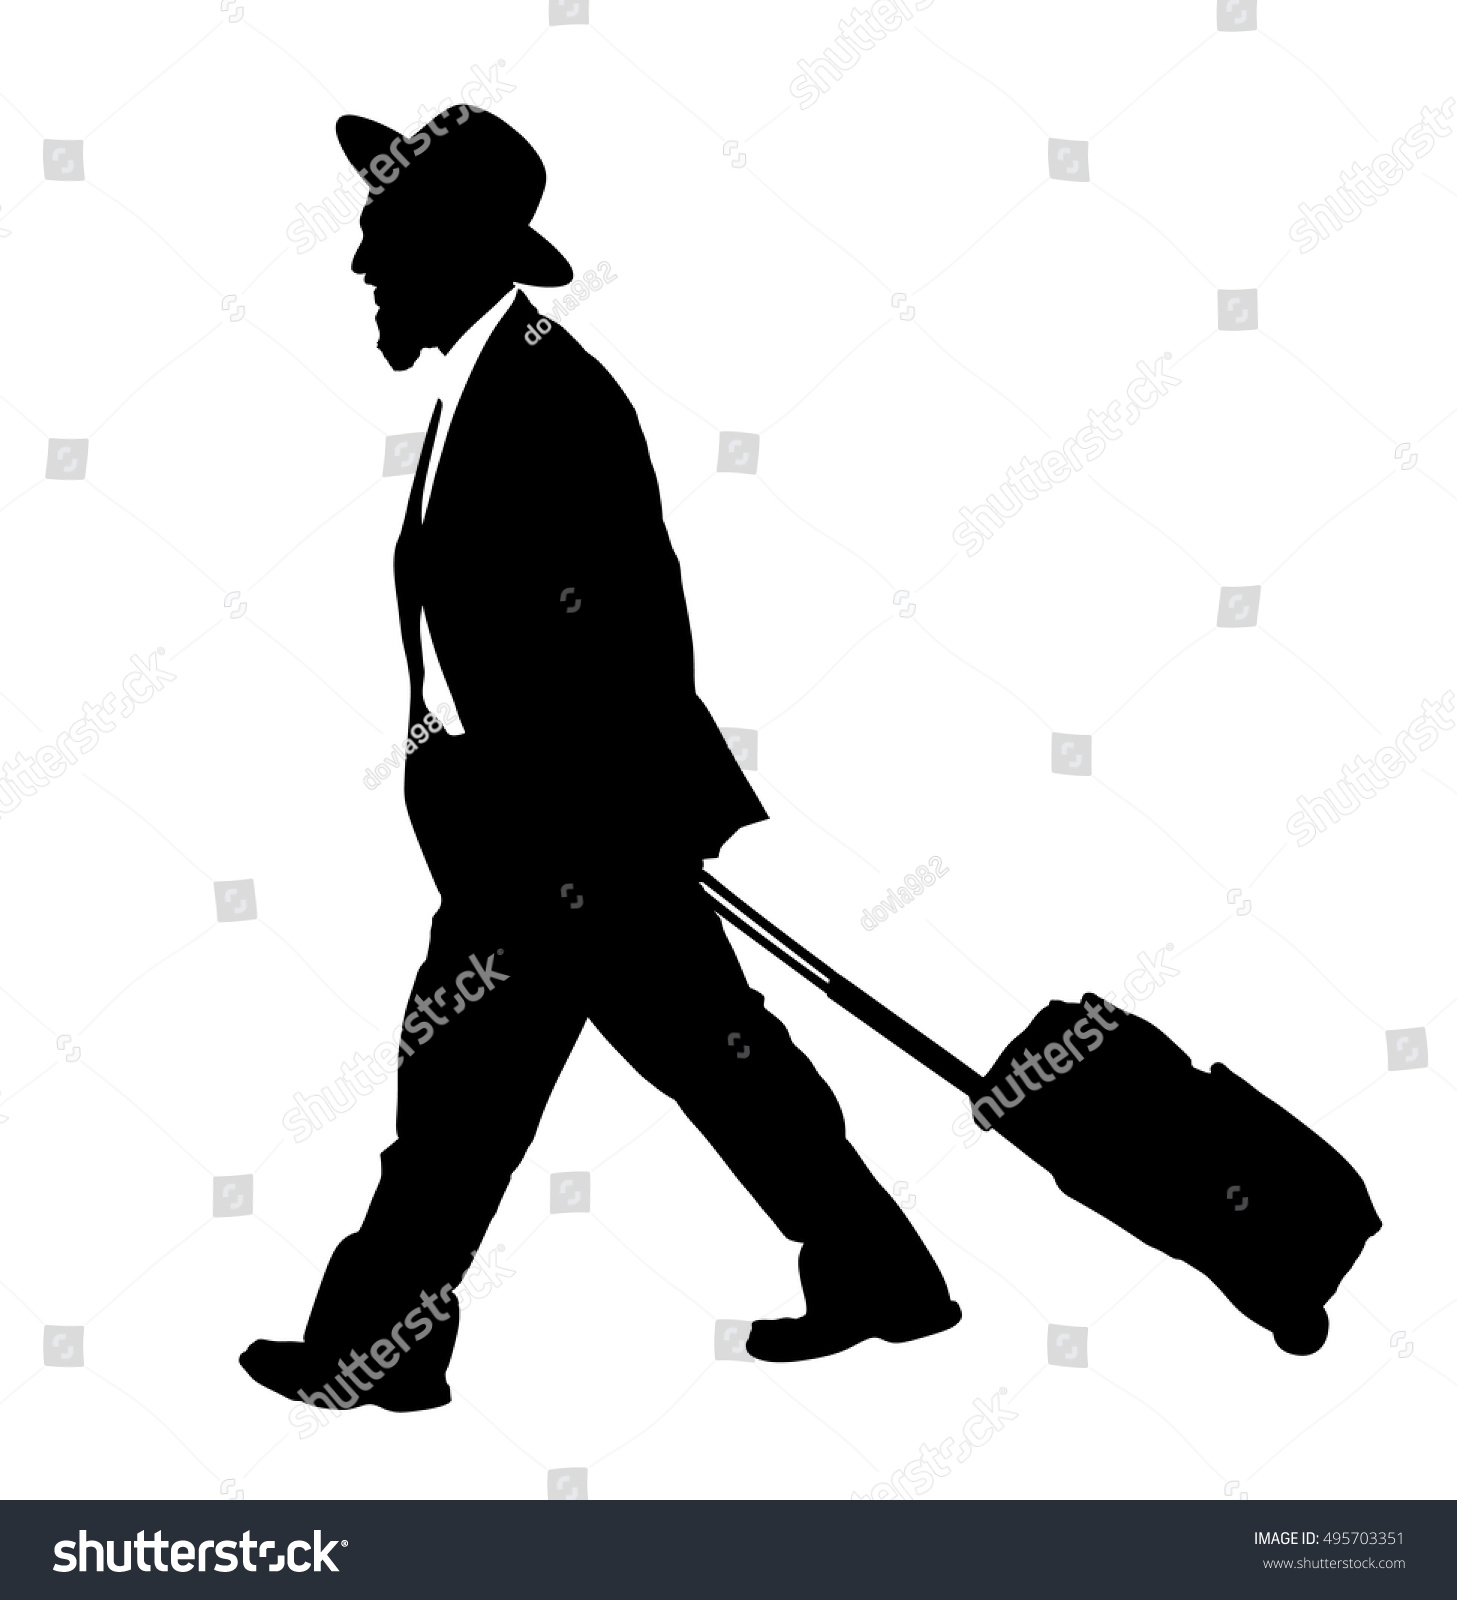 SVG of Amish man in suite vector silhouette illustration. Jewish businessman. Tourist man traveler walking with rolling suitcase vector isolated on white. Diamond merchant. Jeweler buyer, trader from Israel svg